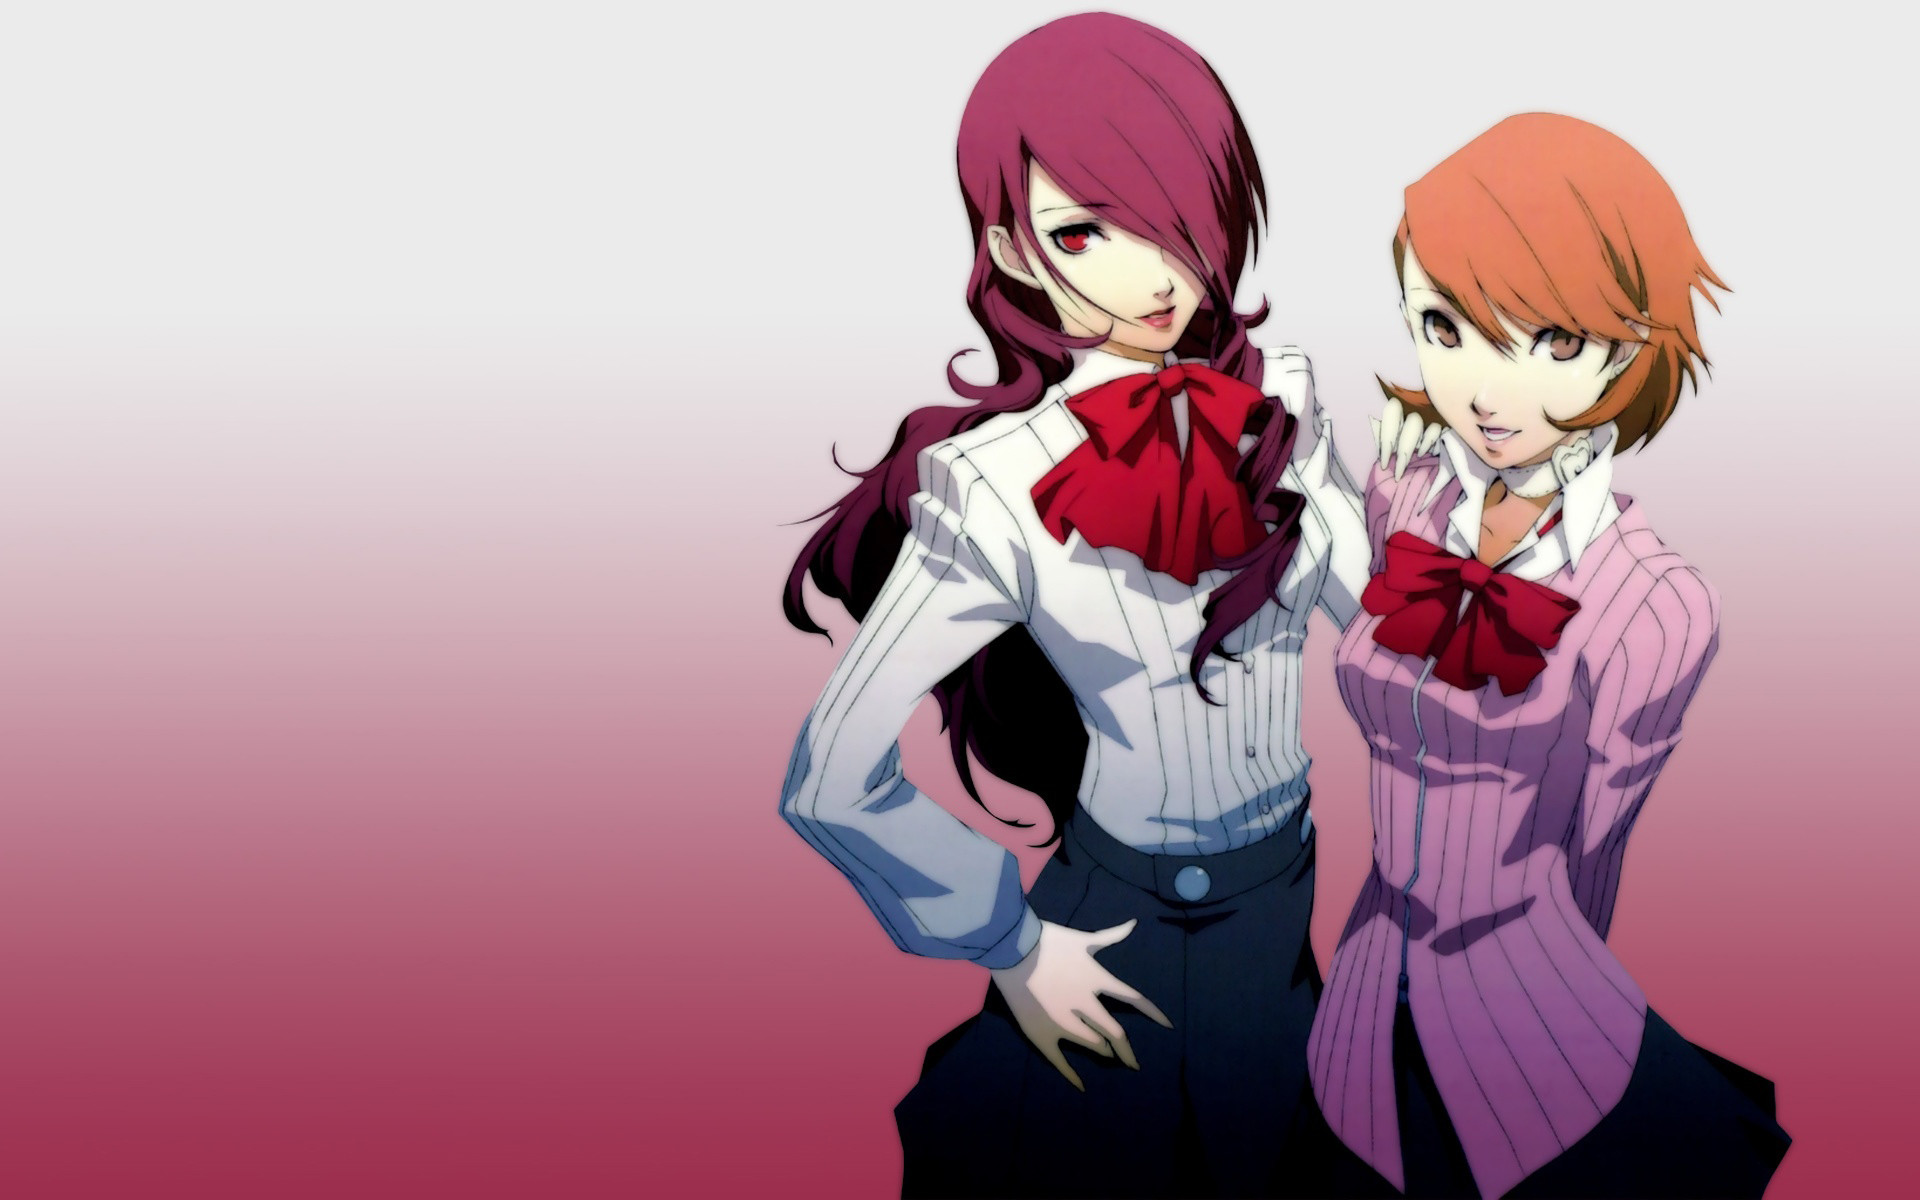 1920x1200 Shin Megami Tensei images Persona 3 HD wallpaper and background photos